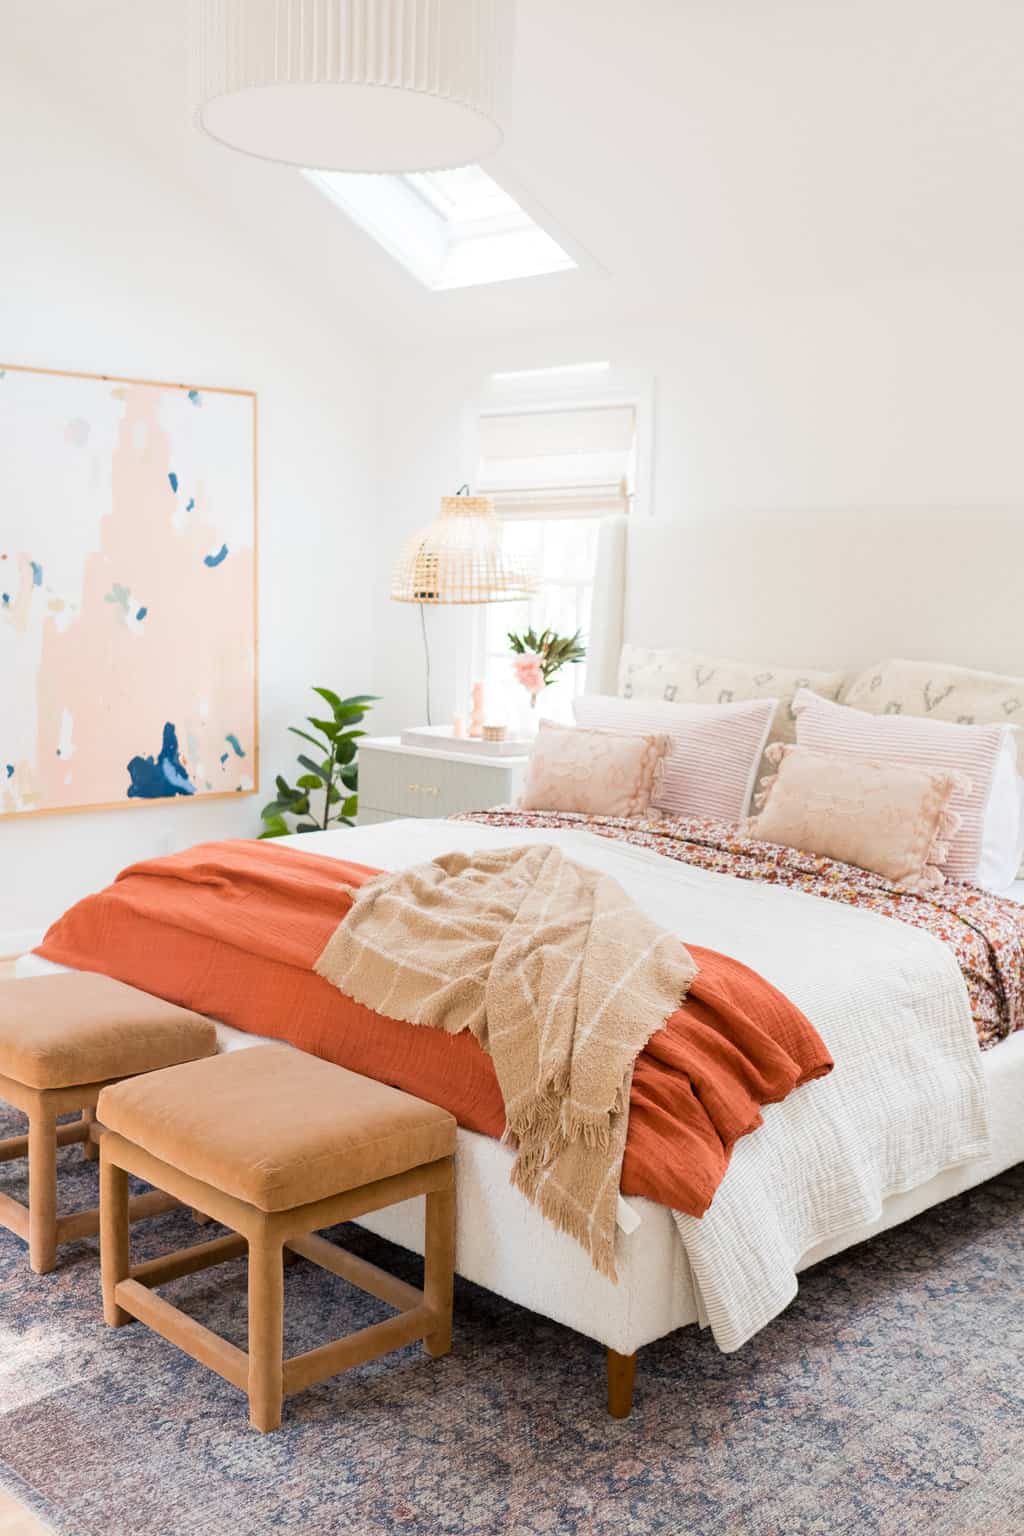 cottage bedroom reveal - by Ashley Rose of Sugar & Cloth